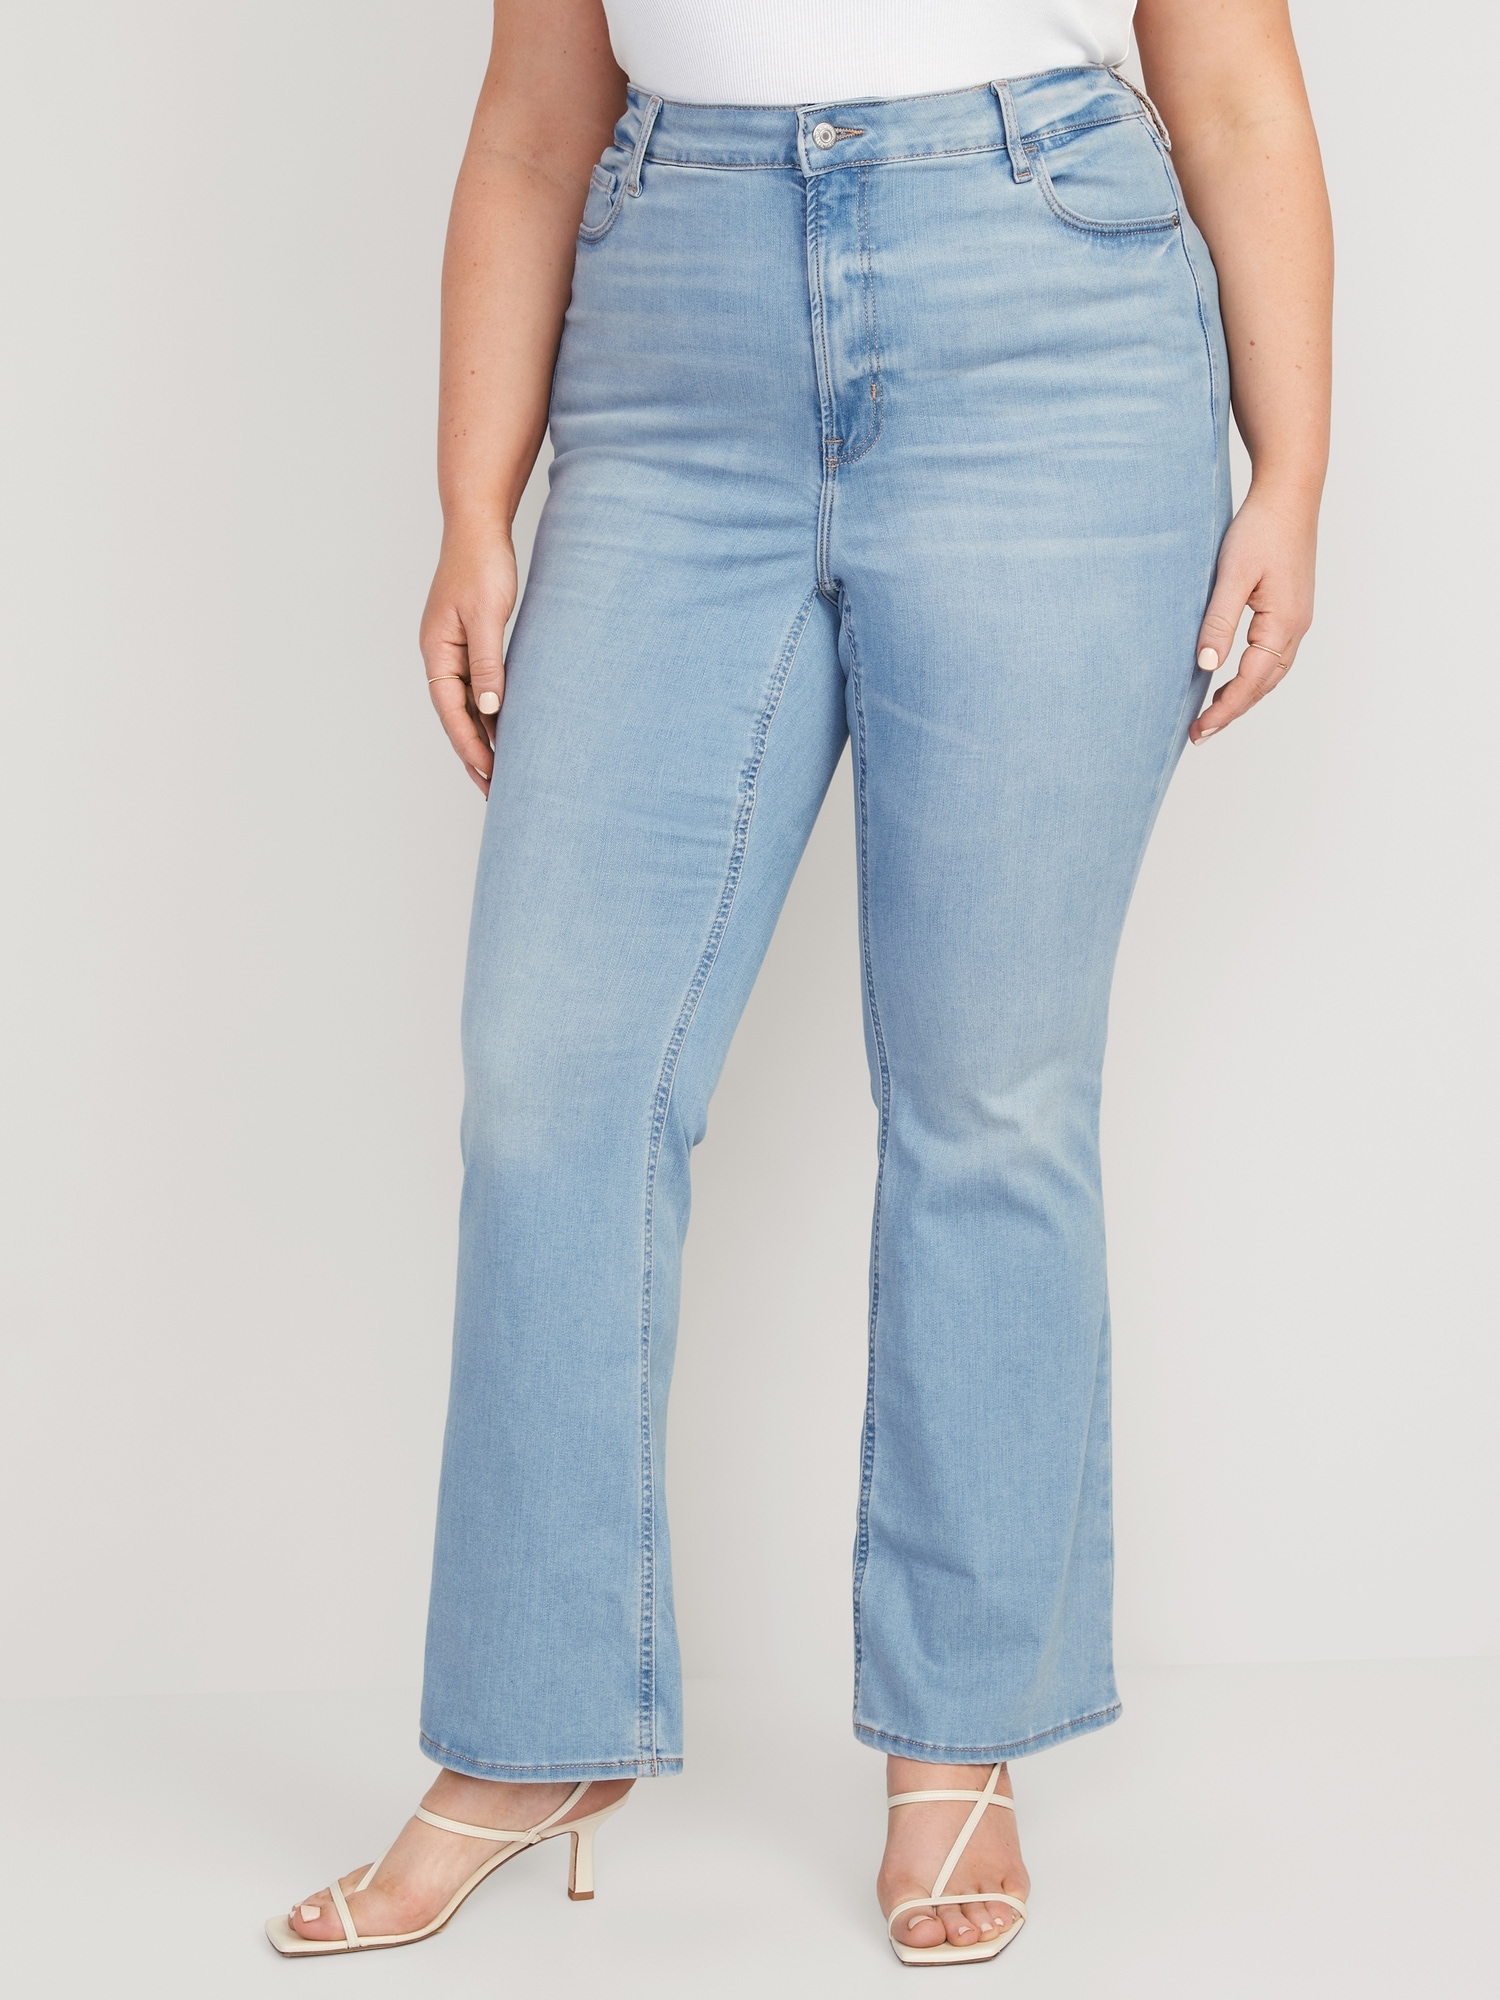 These Fierce Flare Jeans From Gap Are 60% Off Just in Time for Spring